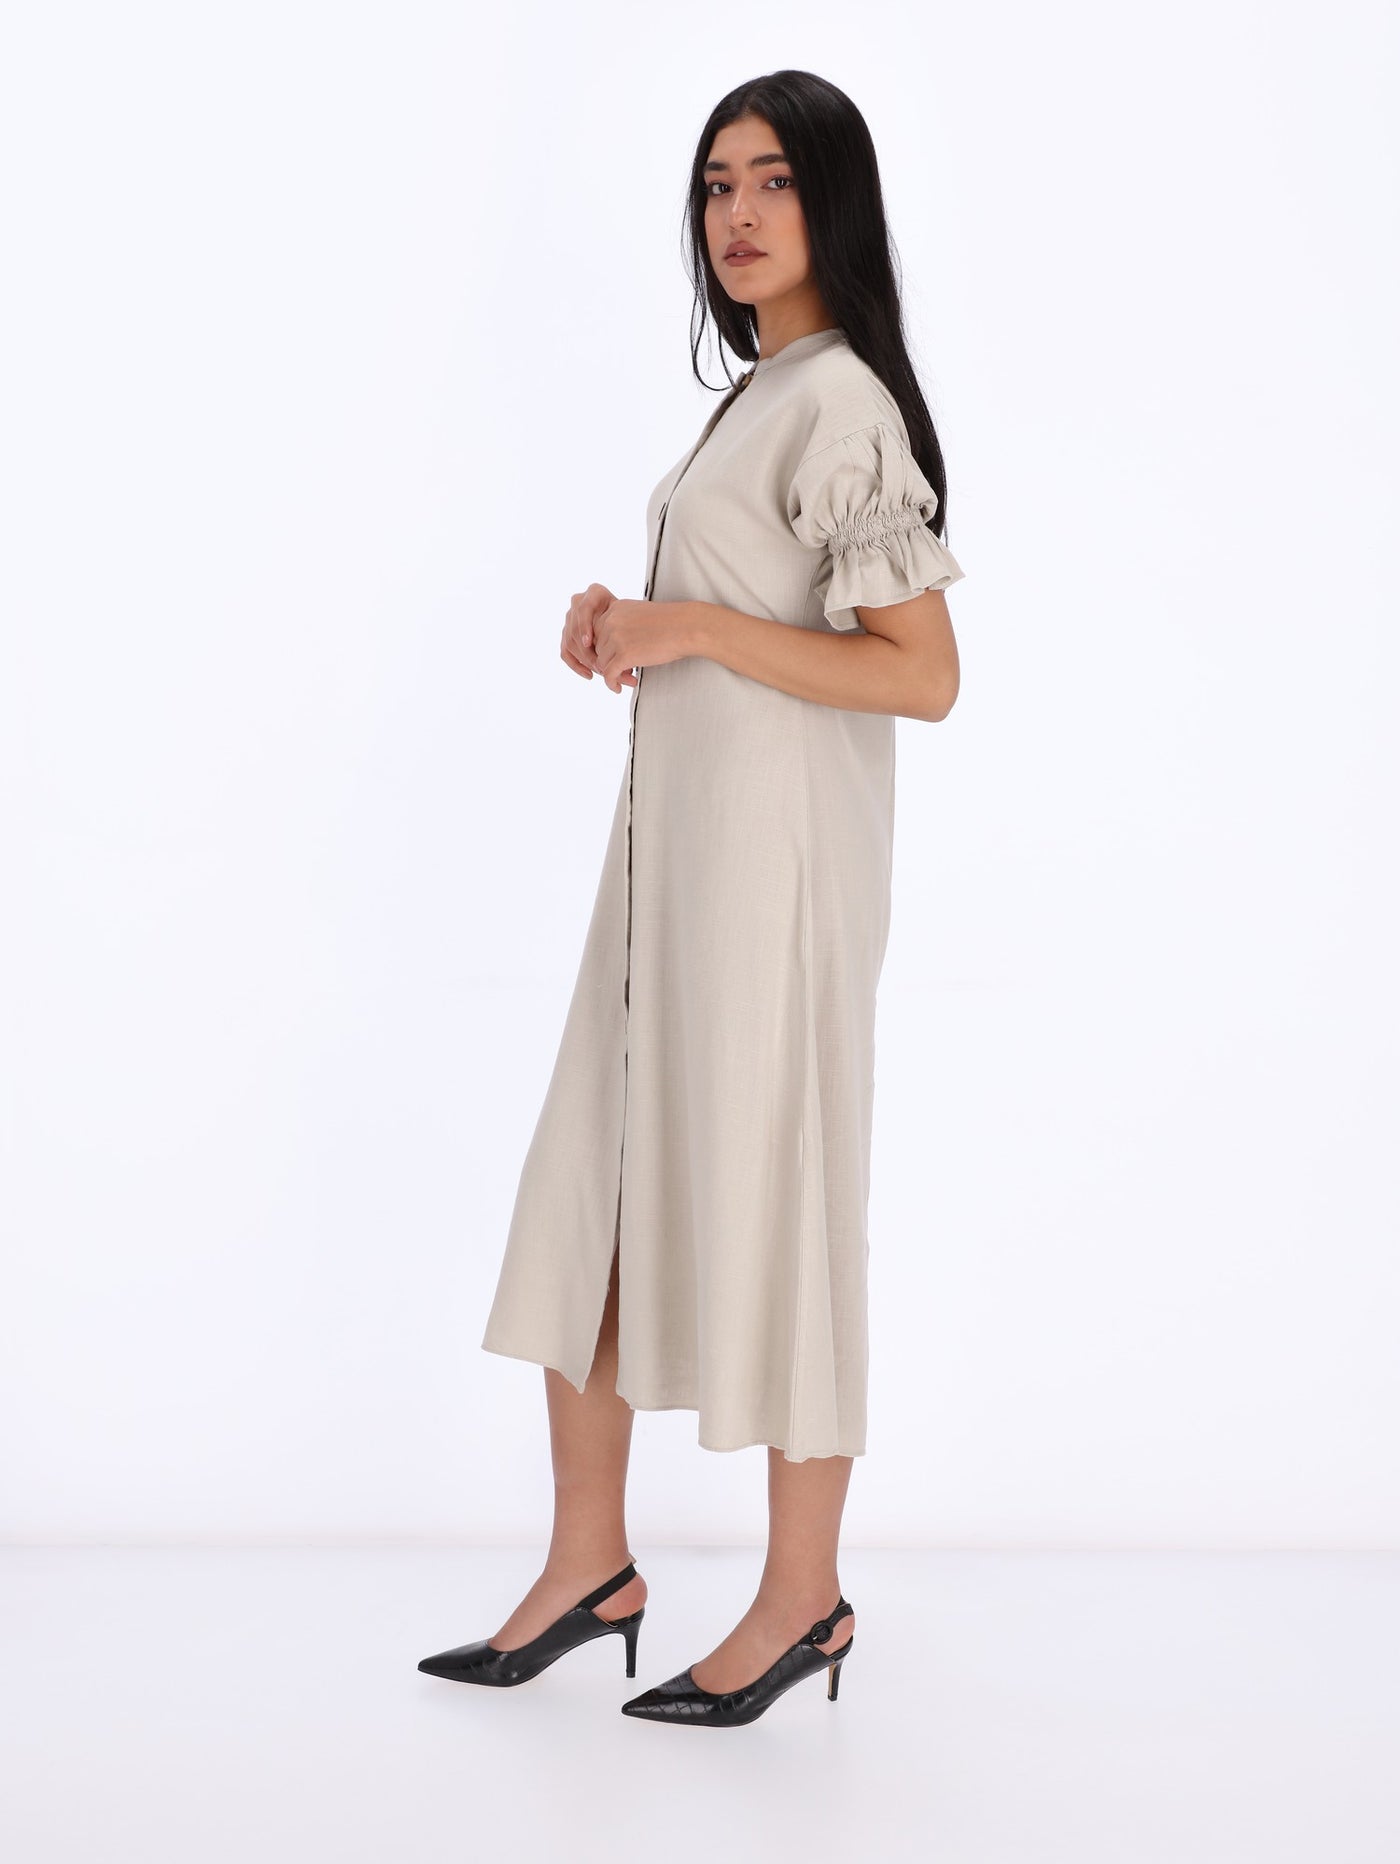  OR Women's Button Down Shirred Sleeve Dress